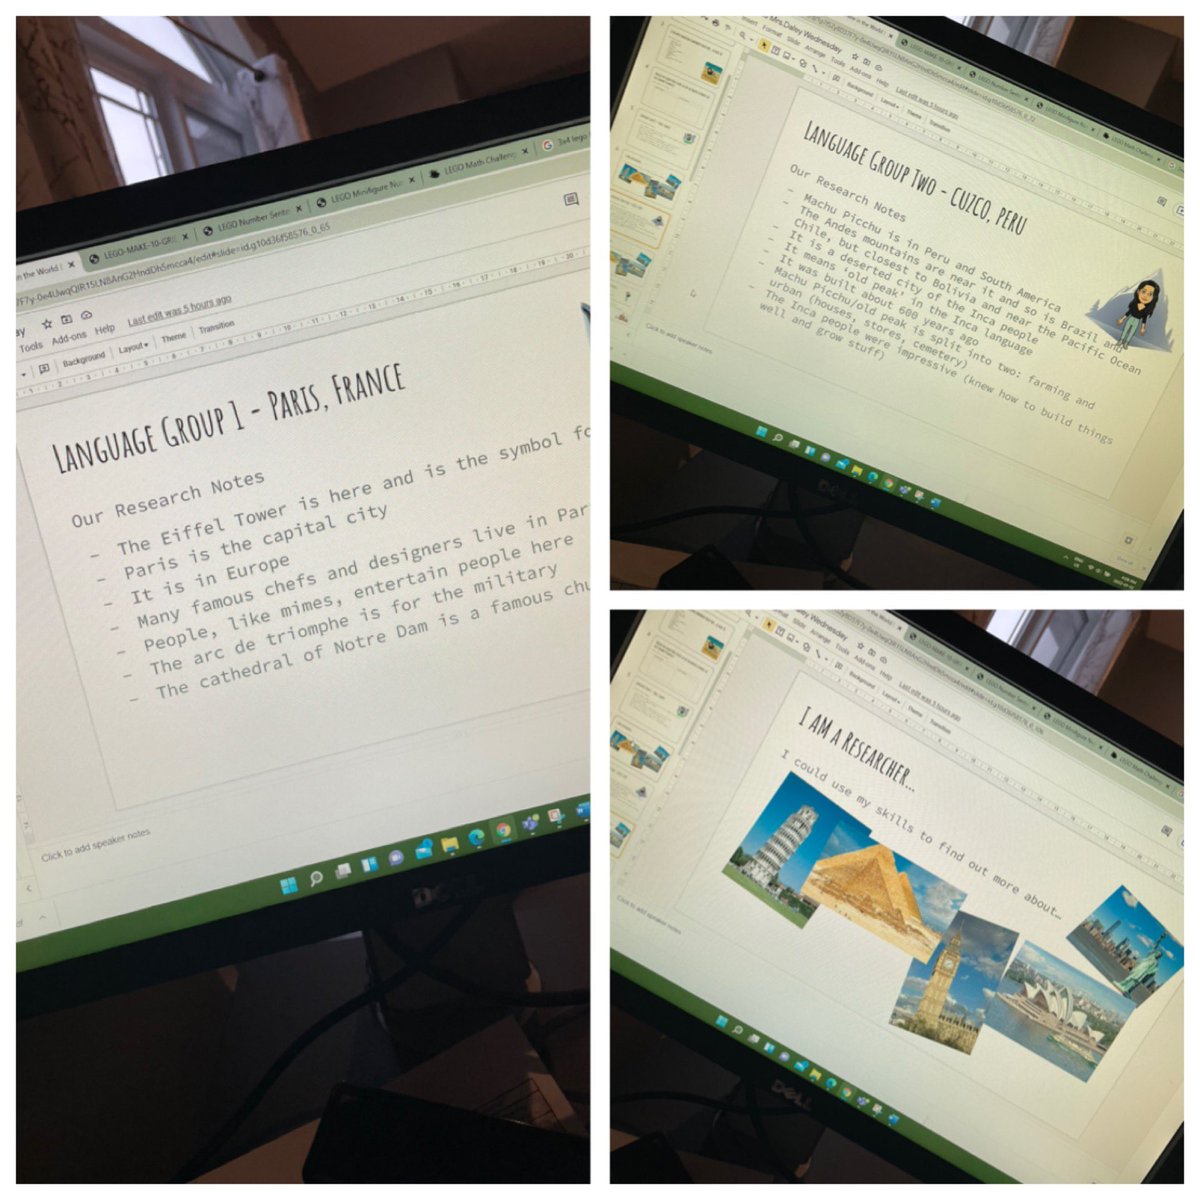 Mrs Daley Twitter Tweet: We used Britannica for differentiated research access in our guided groups today! Each group became an expert on a location and made notes to share with the whole group -then used their geography understanding to find me in Panama! We ❤️Where in the World Weds! @GEDSB @JarvisJets https://t.co/TpNuVcgJbx